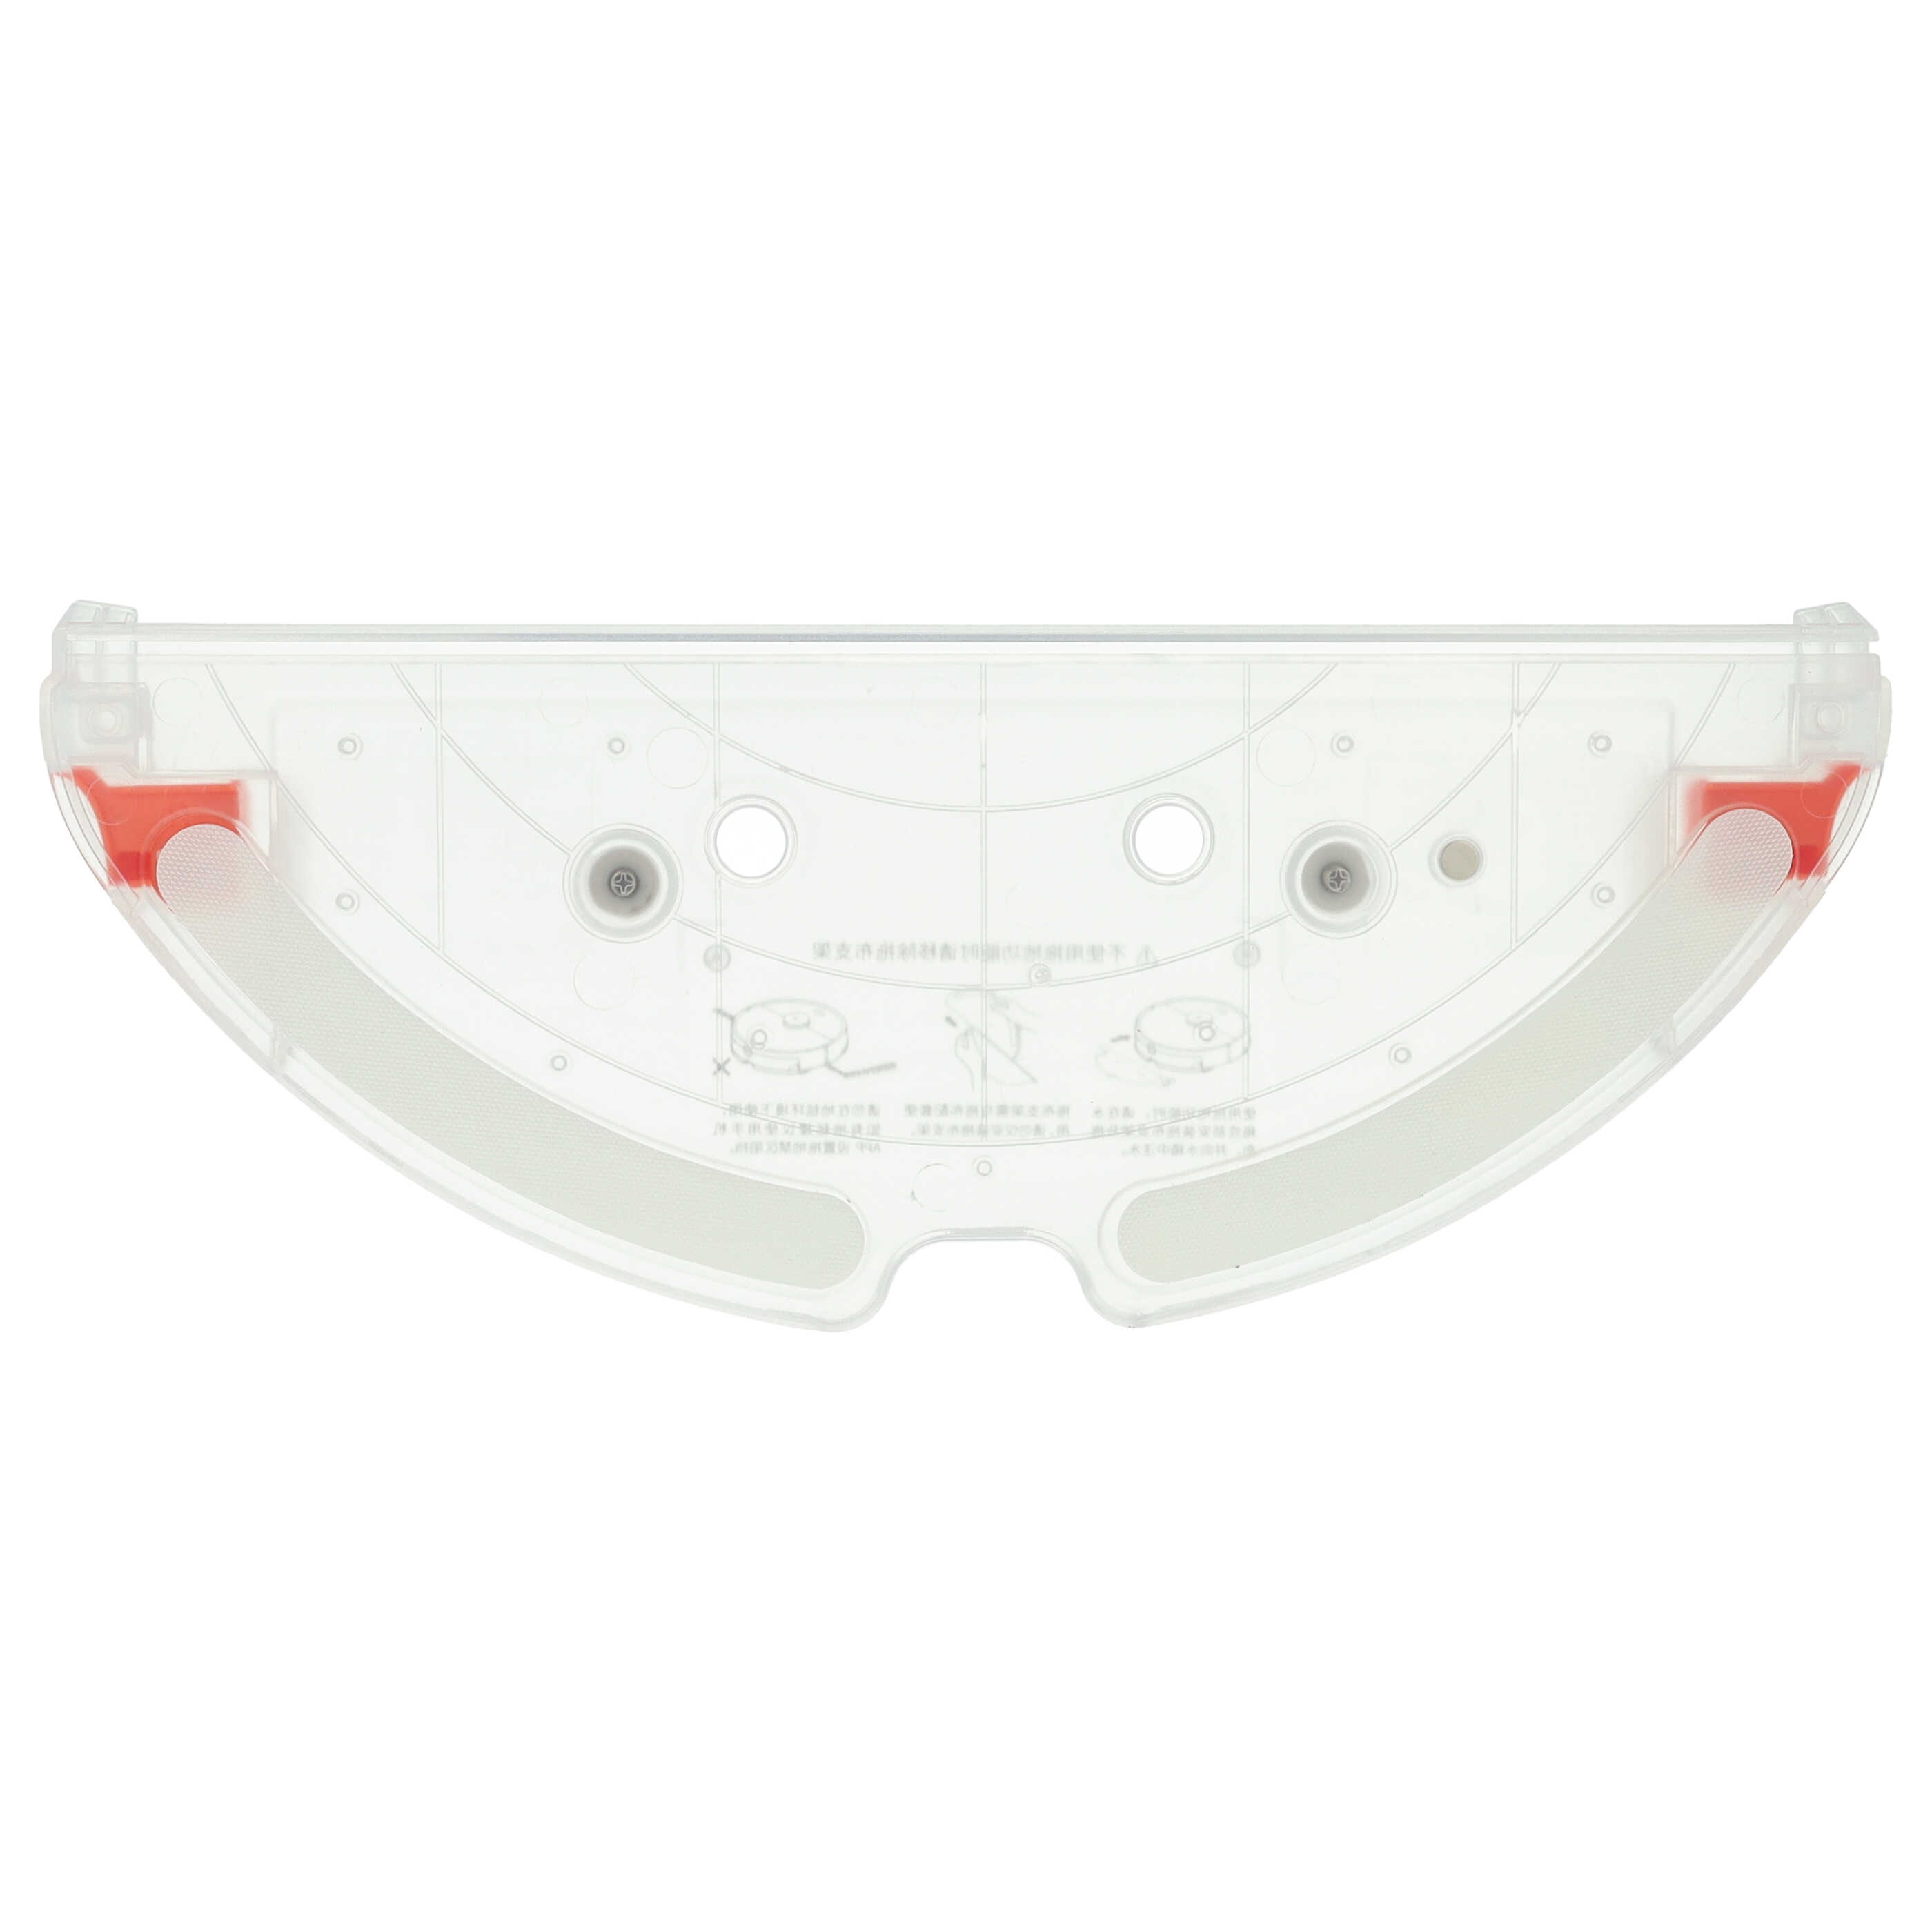 Mop Plate suitable for Roborock S5 Max Robot Vacuum Cleaner - ABS Plastic, transparent / red